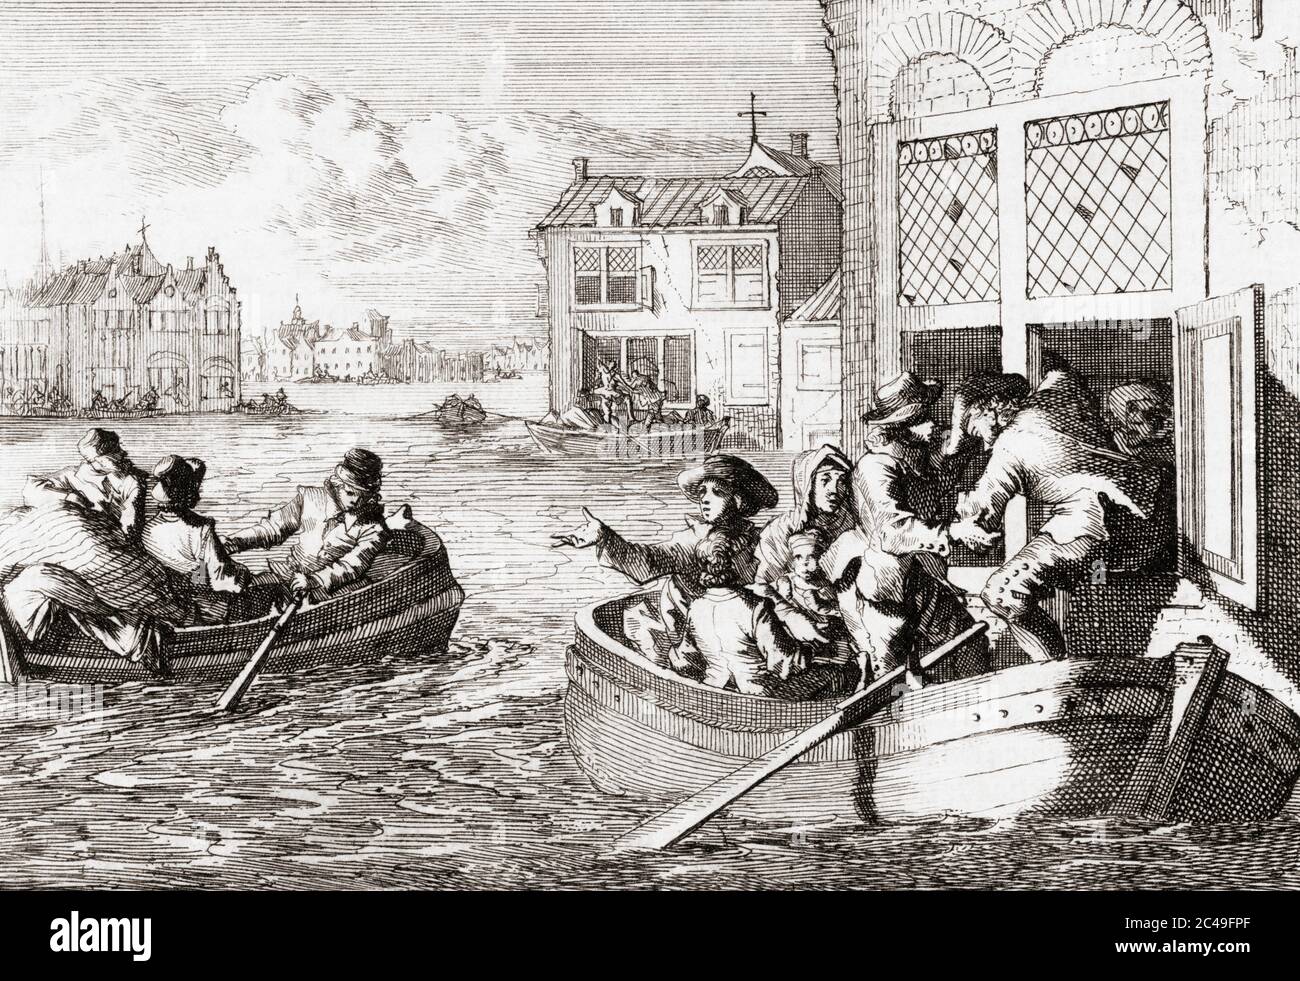 The Paris flood of 1658 when the river Seine rose by 8.62 metres over 10 days.  After a work by Dutch illustrator Caspar Luyken, 1672 - 1708. Stock Photo